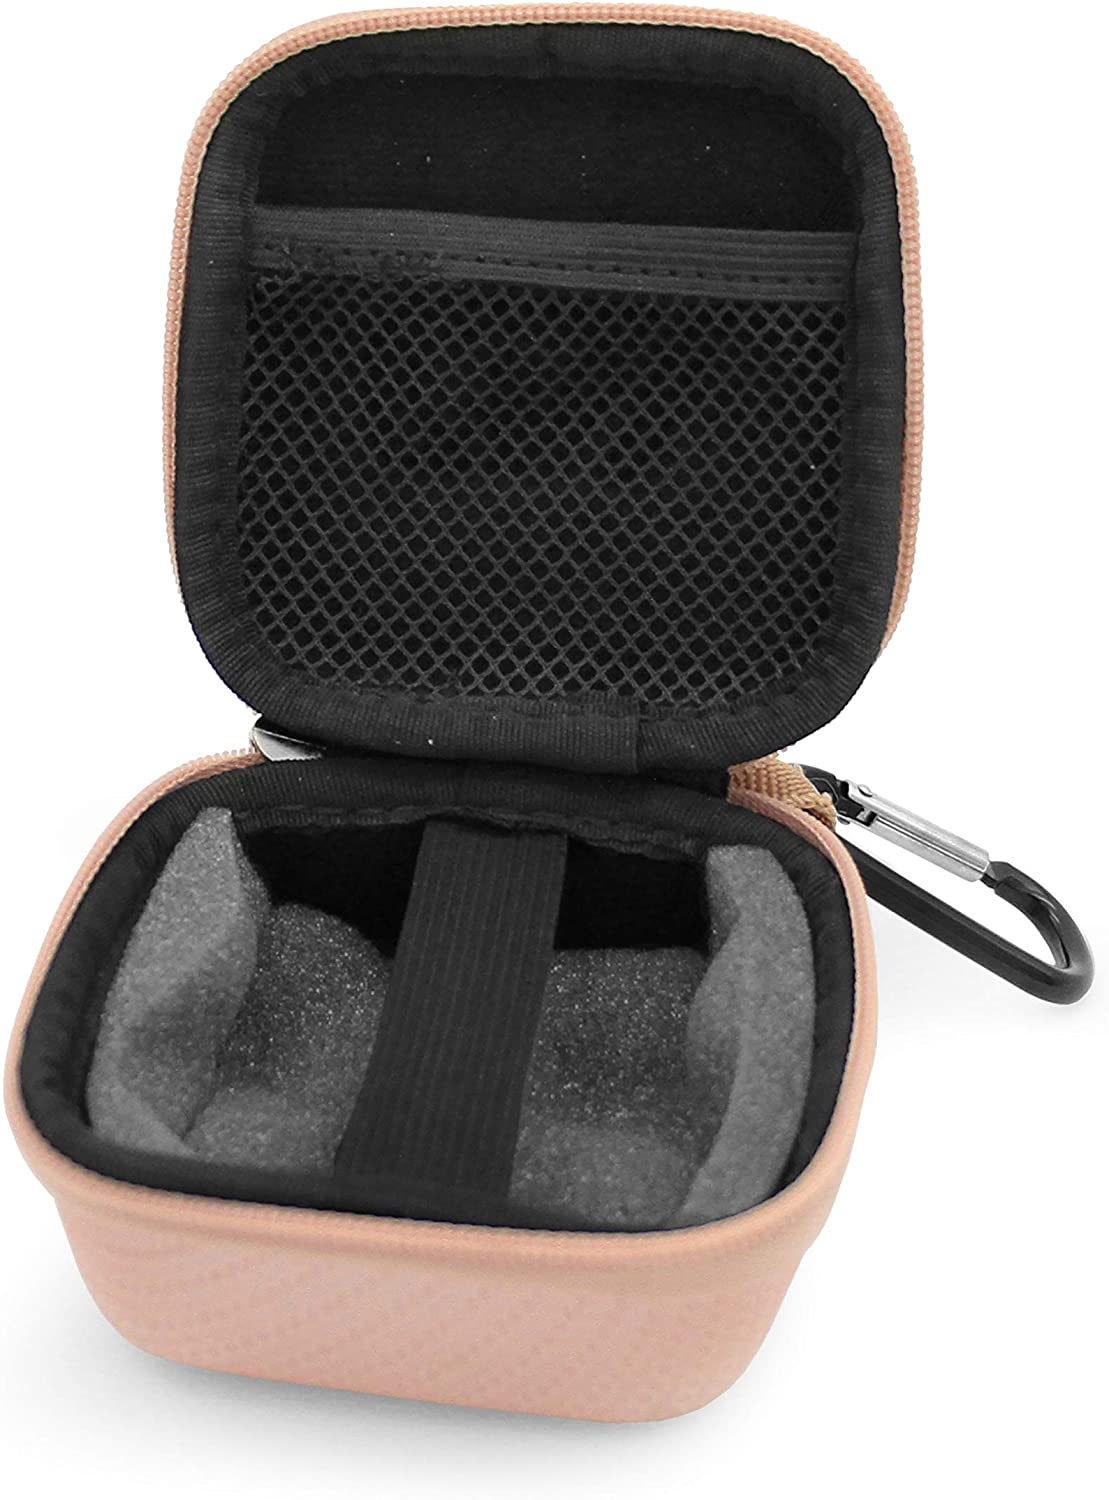 CASEMATIX Protective Travel Case Compatible with Blinger Deluxe